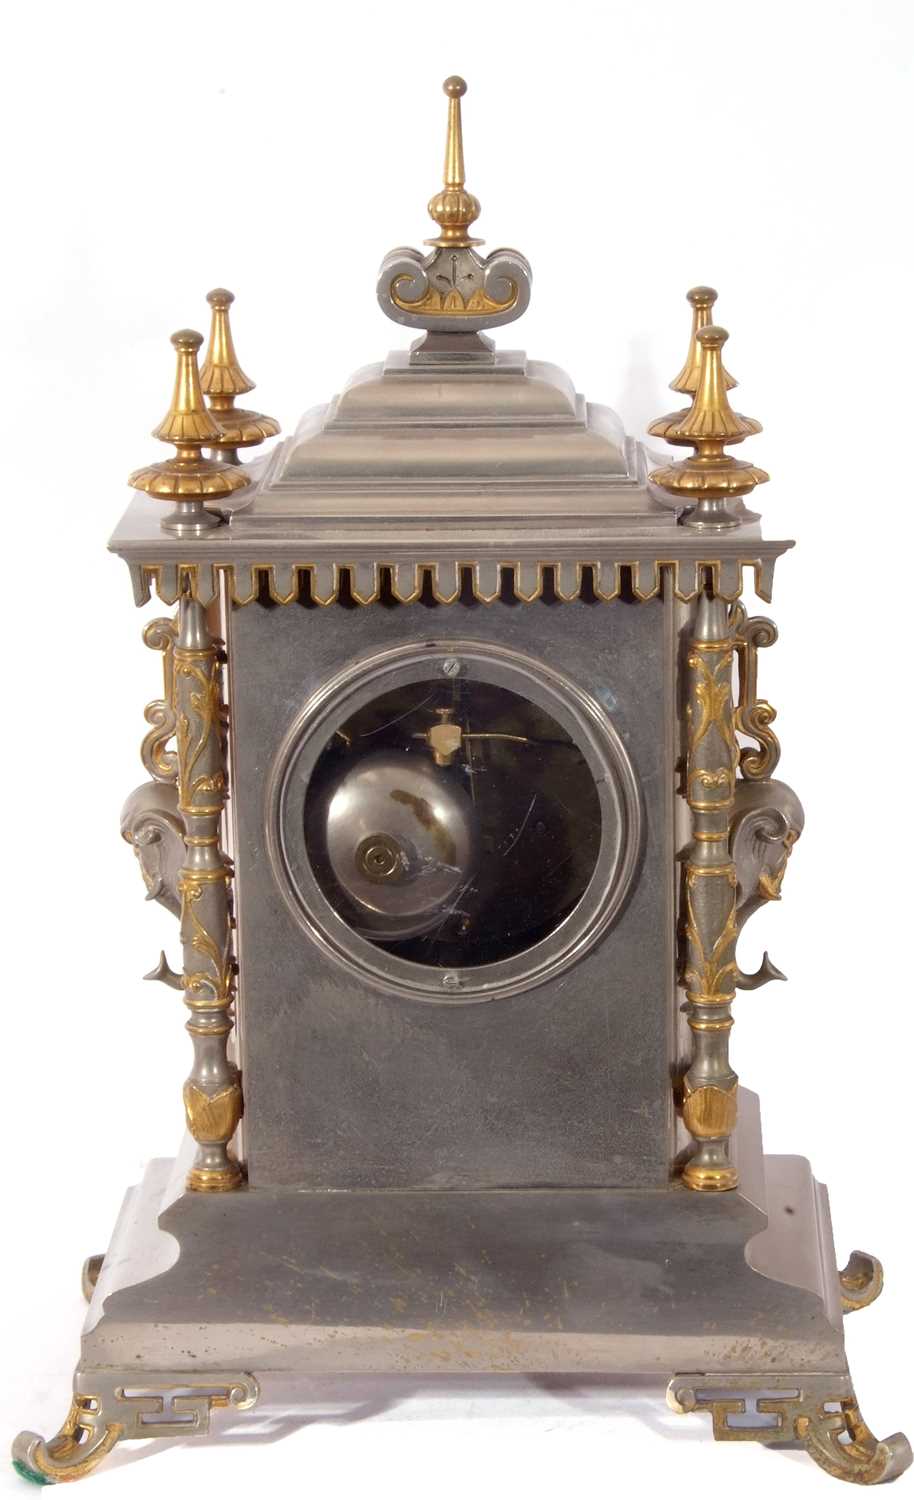 Good quality late 19th/early 20th century mantel clock, set in architectural metal and gilt - Image 7 of 11